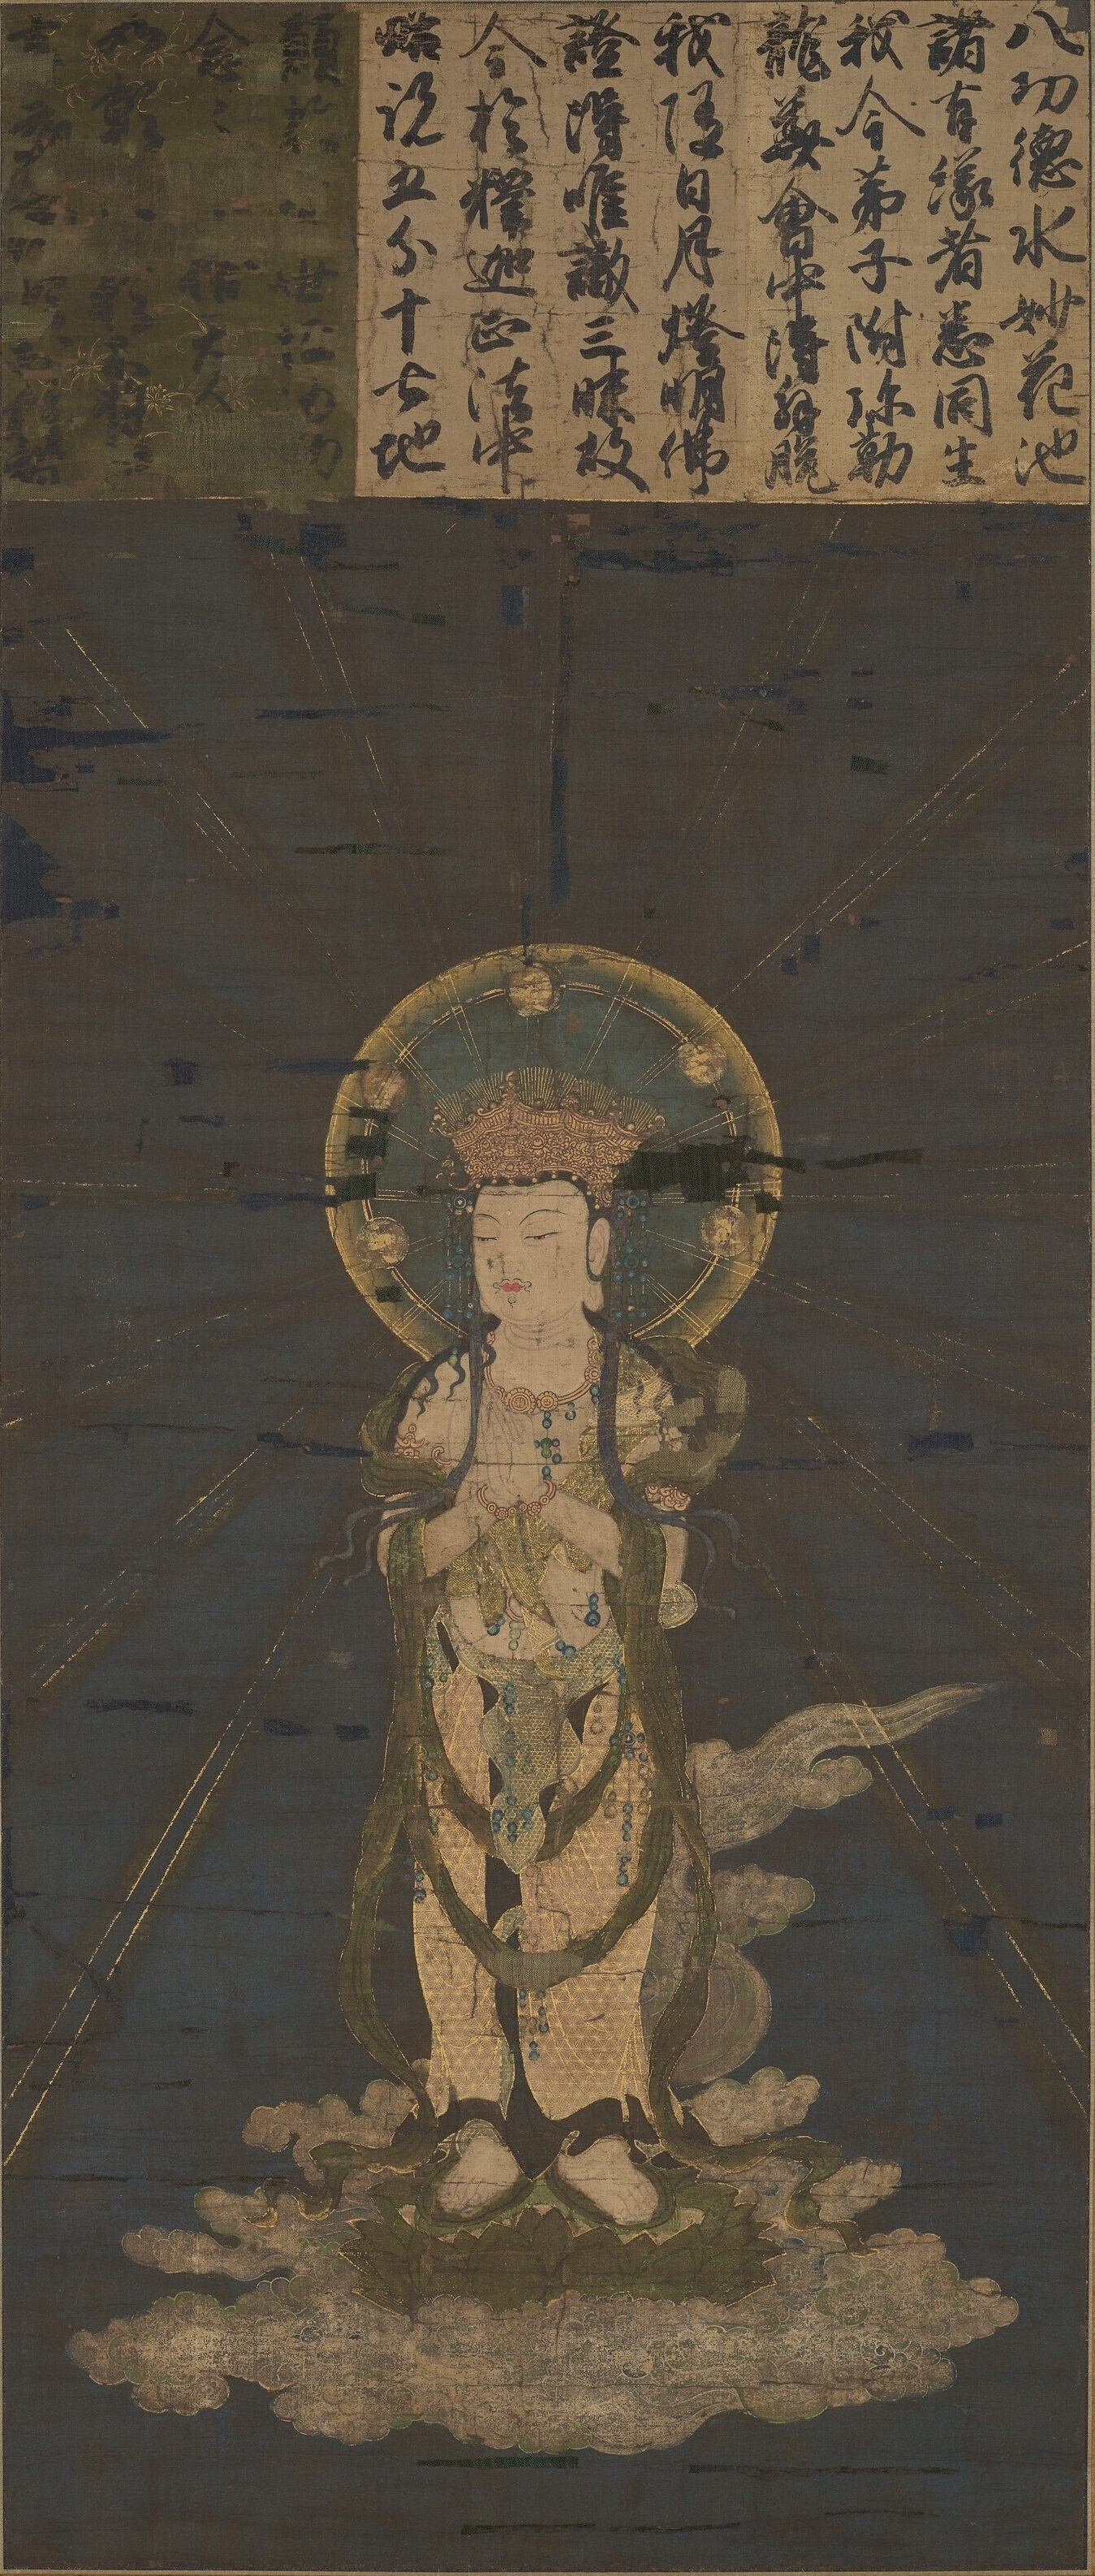 Important Buddhist Paintings from the Collection of David and Nayda Utterberg